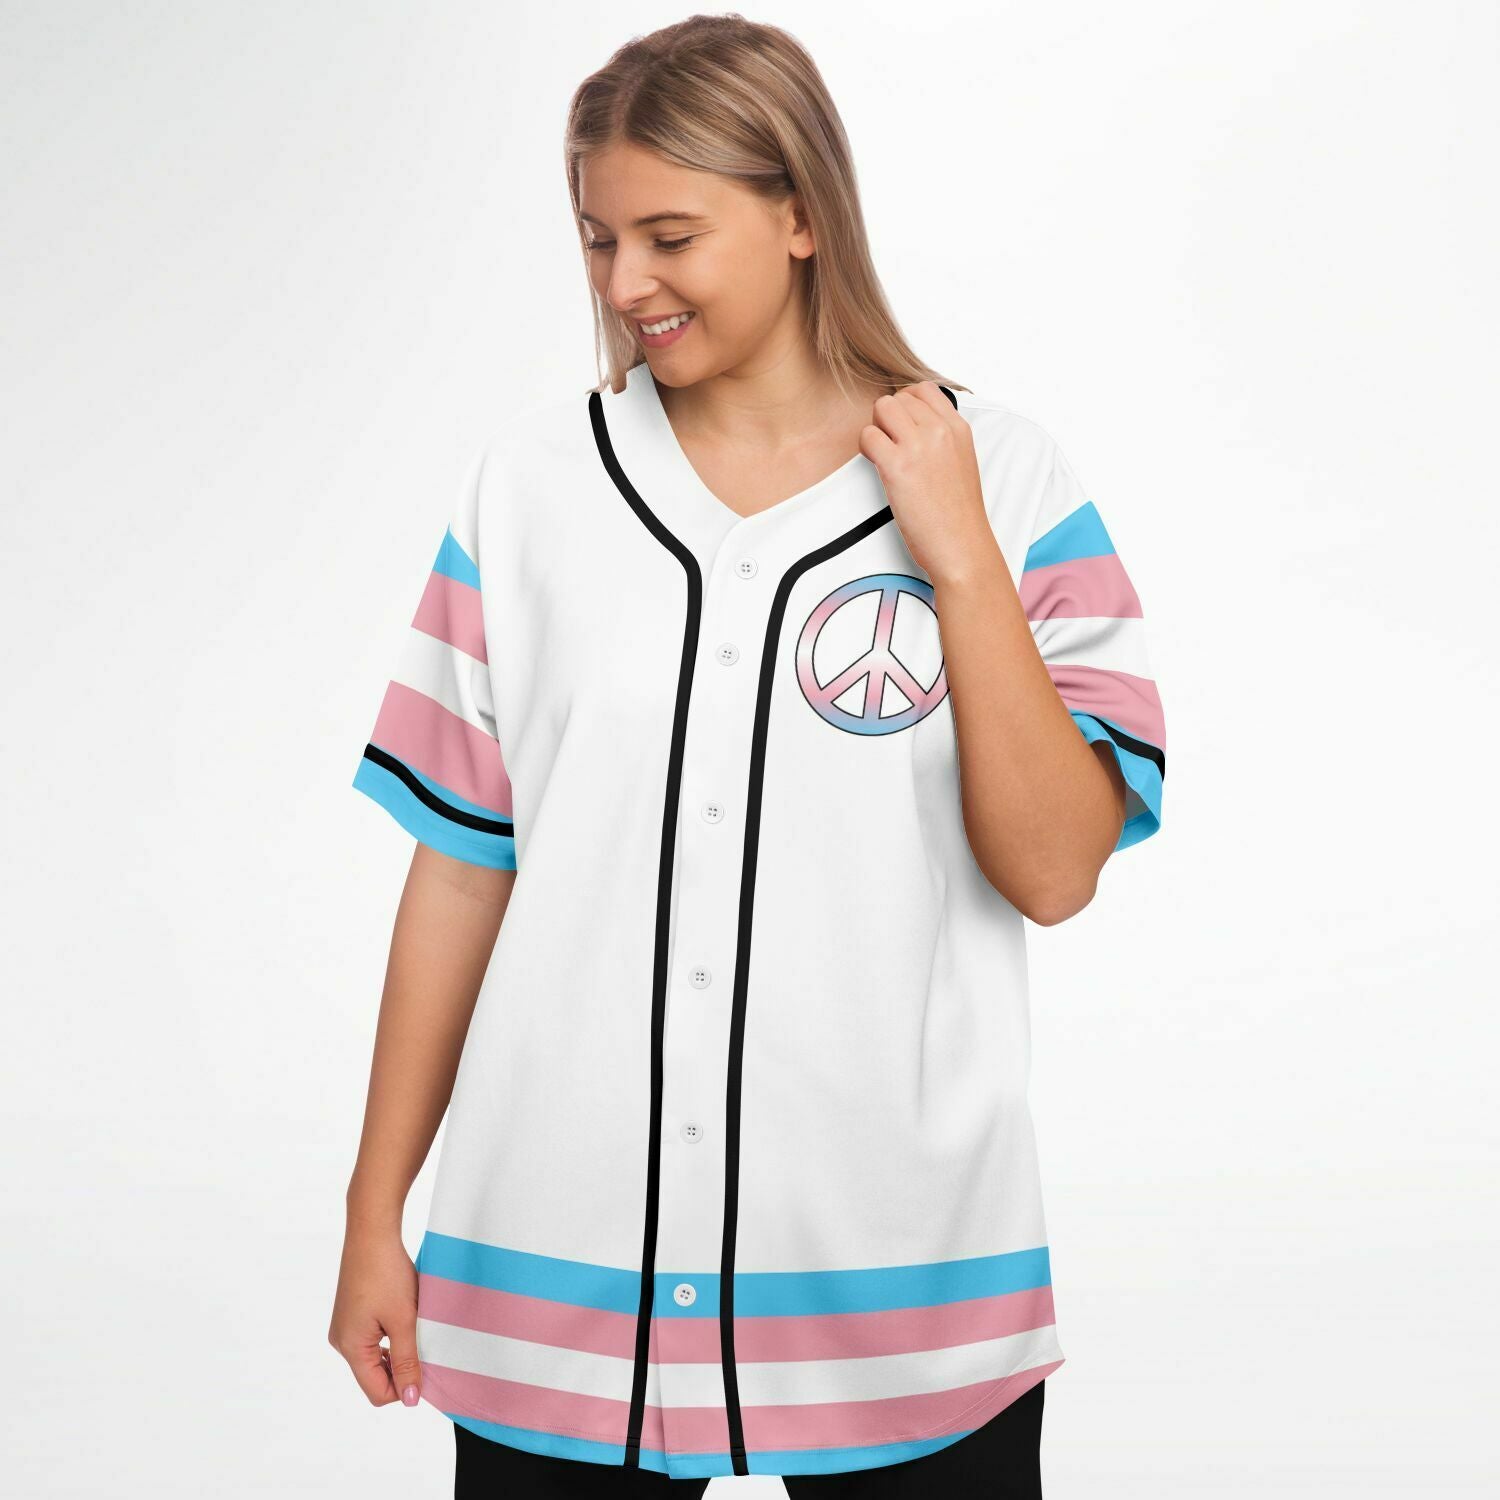  AOVL Personalized LGBT Pride Baseball Jersey Pride Hand LGBT  Flag Jersey Rainbow Les Gay Shirts LGBT Pride Month Jerseys (LGBT 1) :  Clothing, Shoes & Jewelry